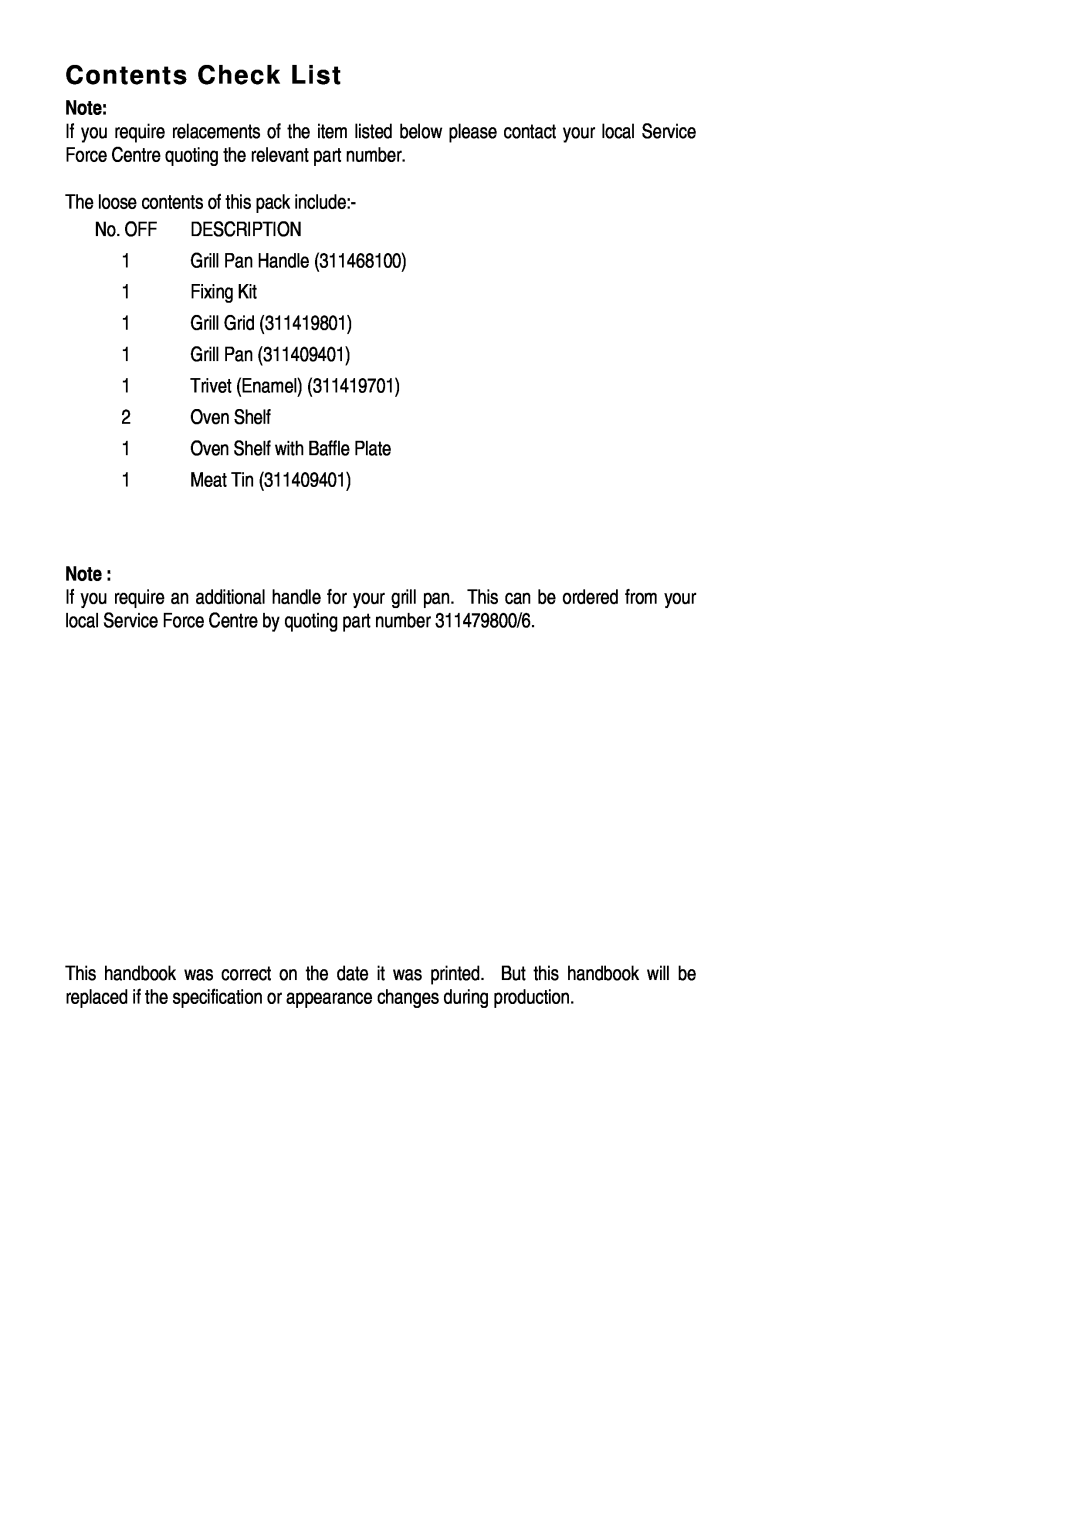 Electrolux EOG 900 manual Contents Check List 